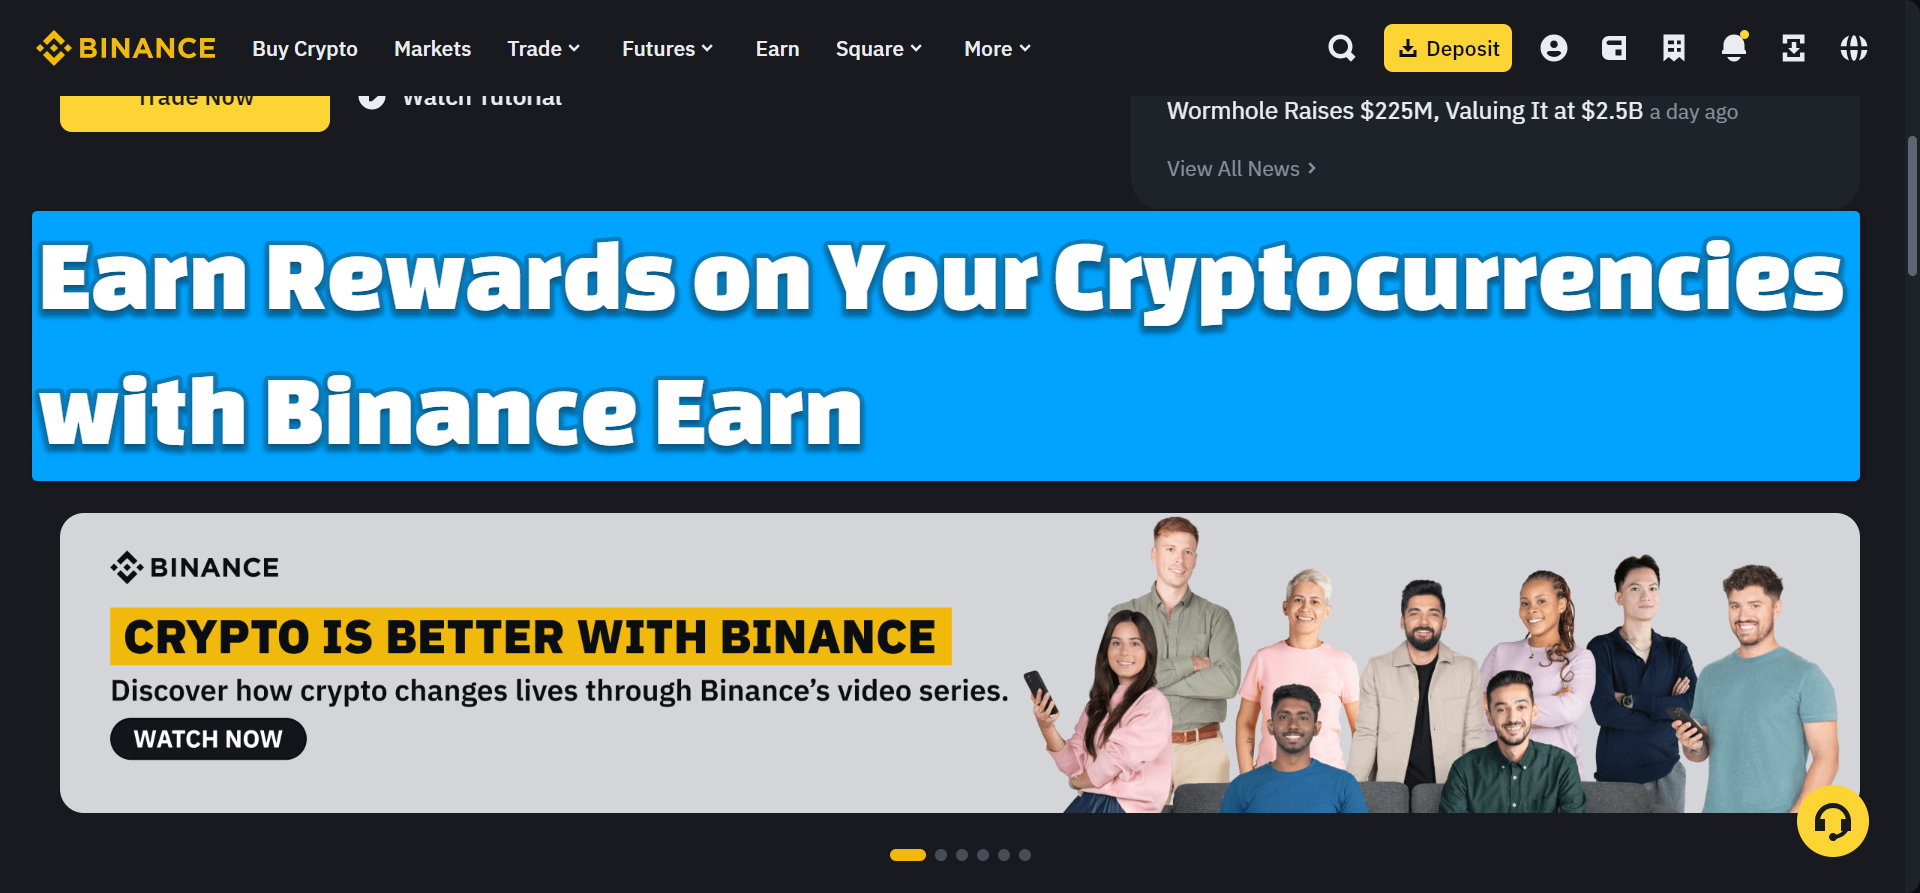 Earn Rewards on Your Cryptocurrencies with Binance Earn Earn Rewards on Your Cryptocurrencies with Binance Earn